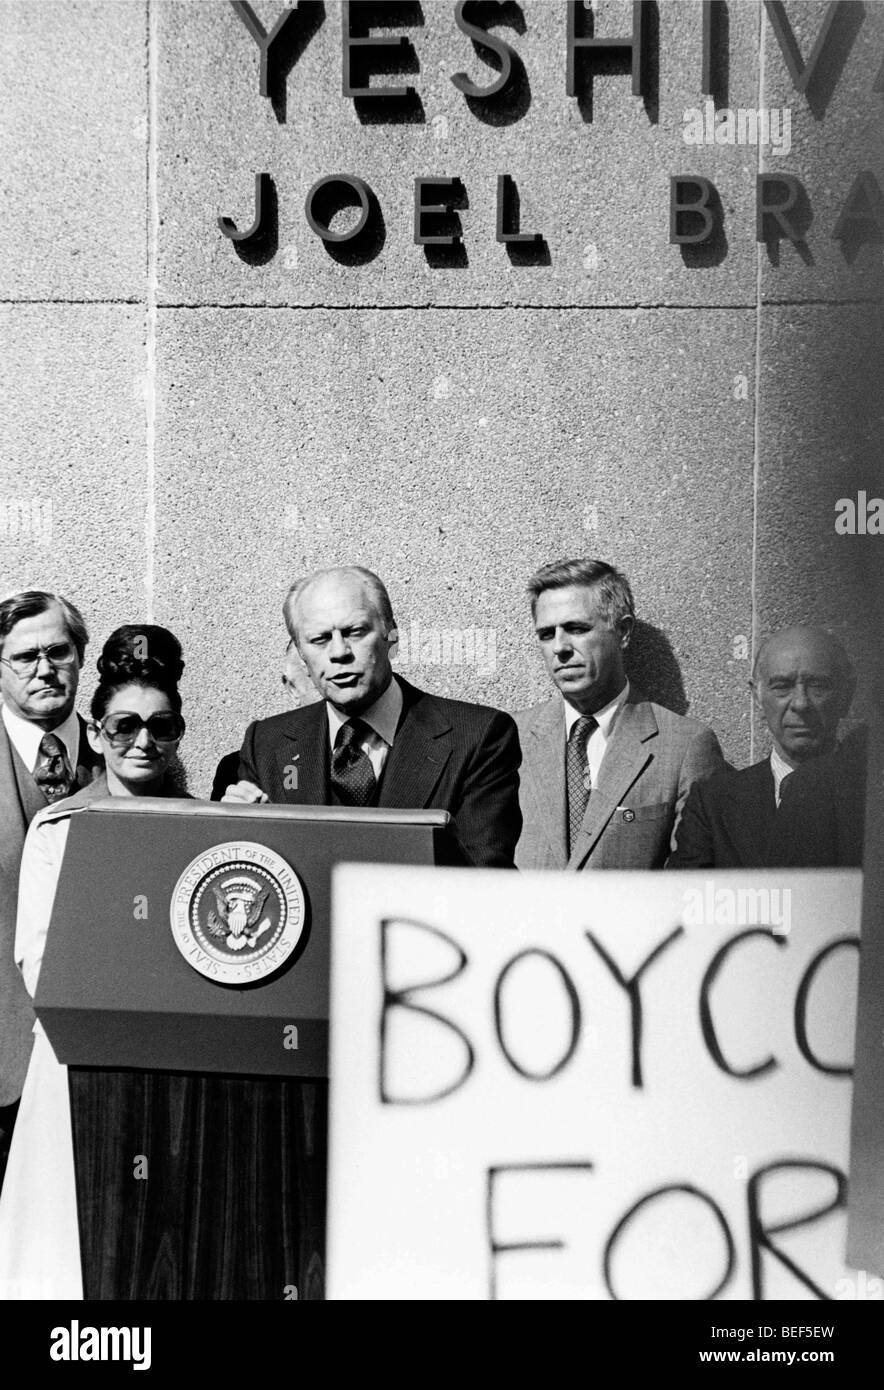 President Ford speaking at a High School Stock Photo